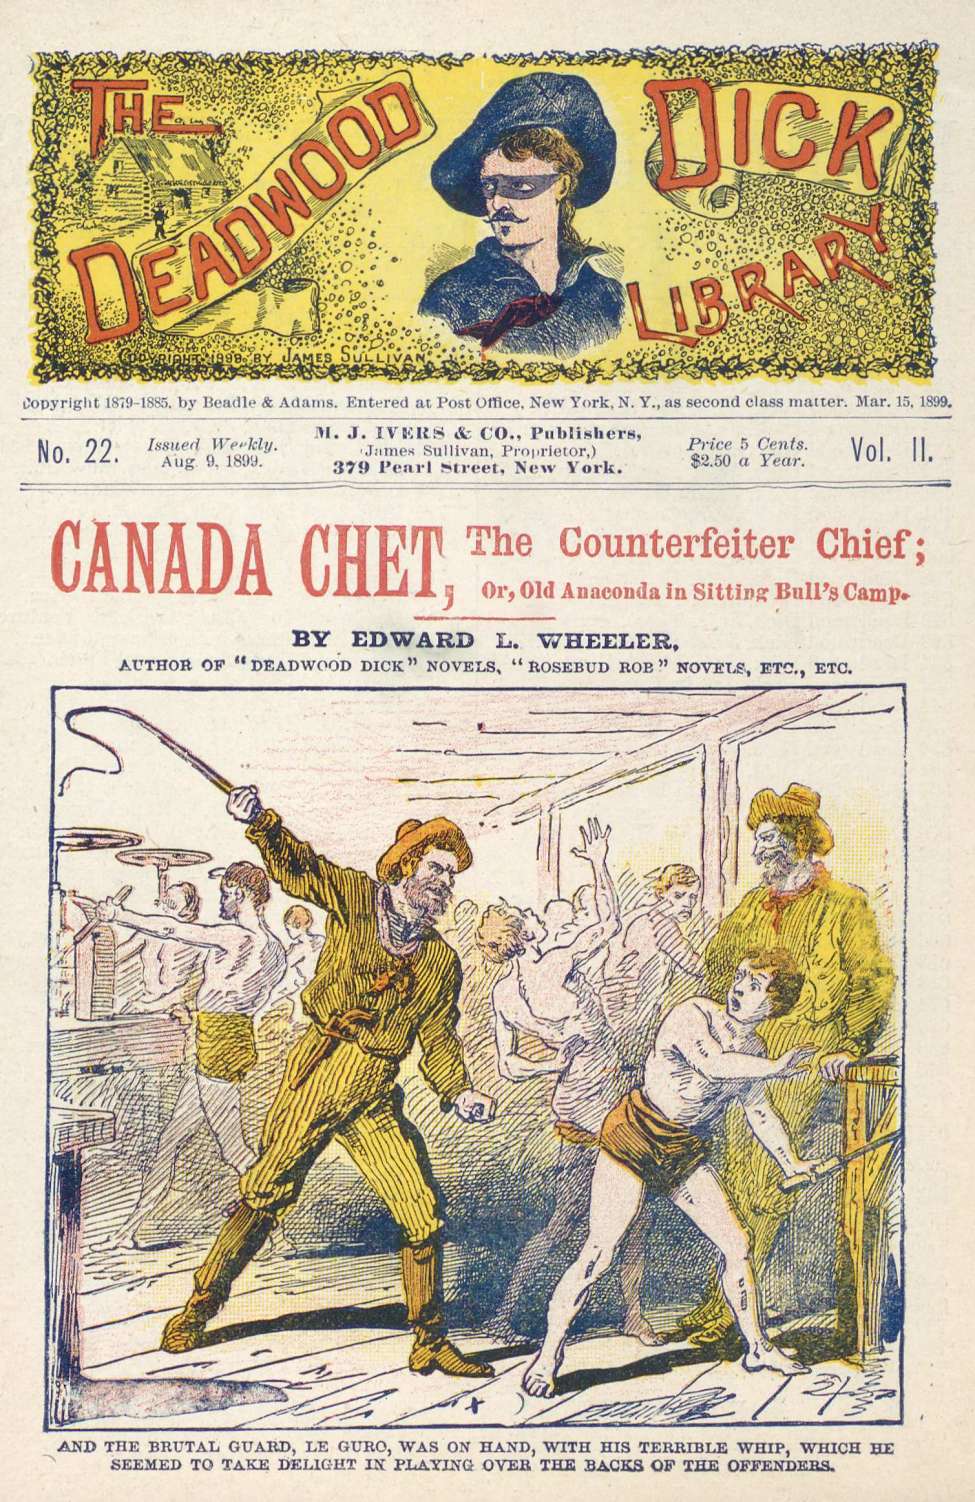 Book Cover For Deadwood Dick Library v2 22 - Canada Chet, the Counterfeiter Chief